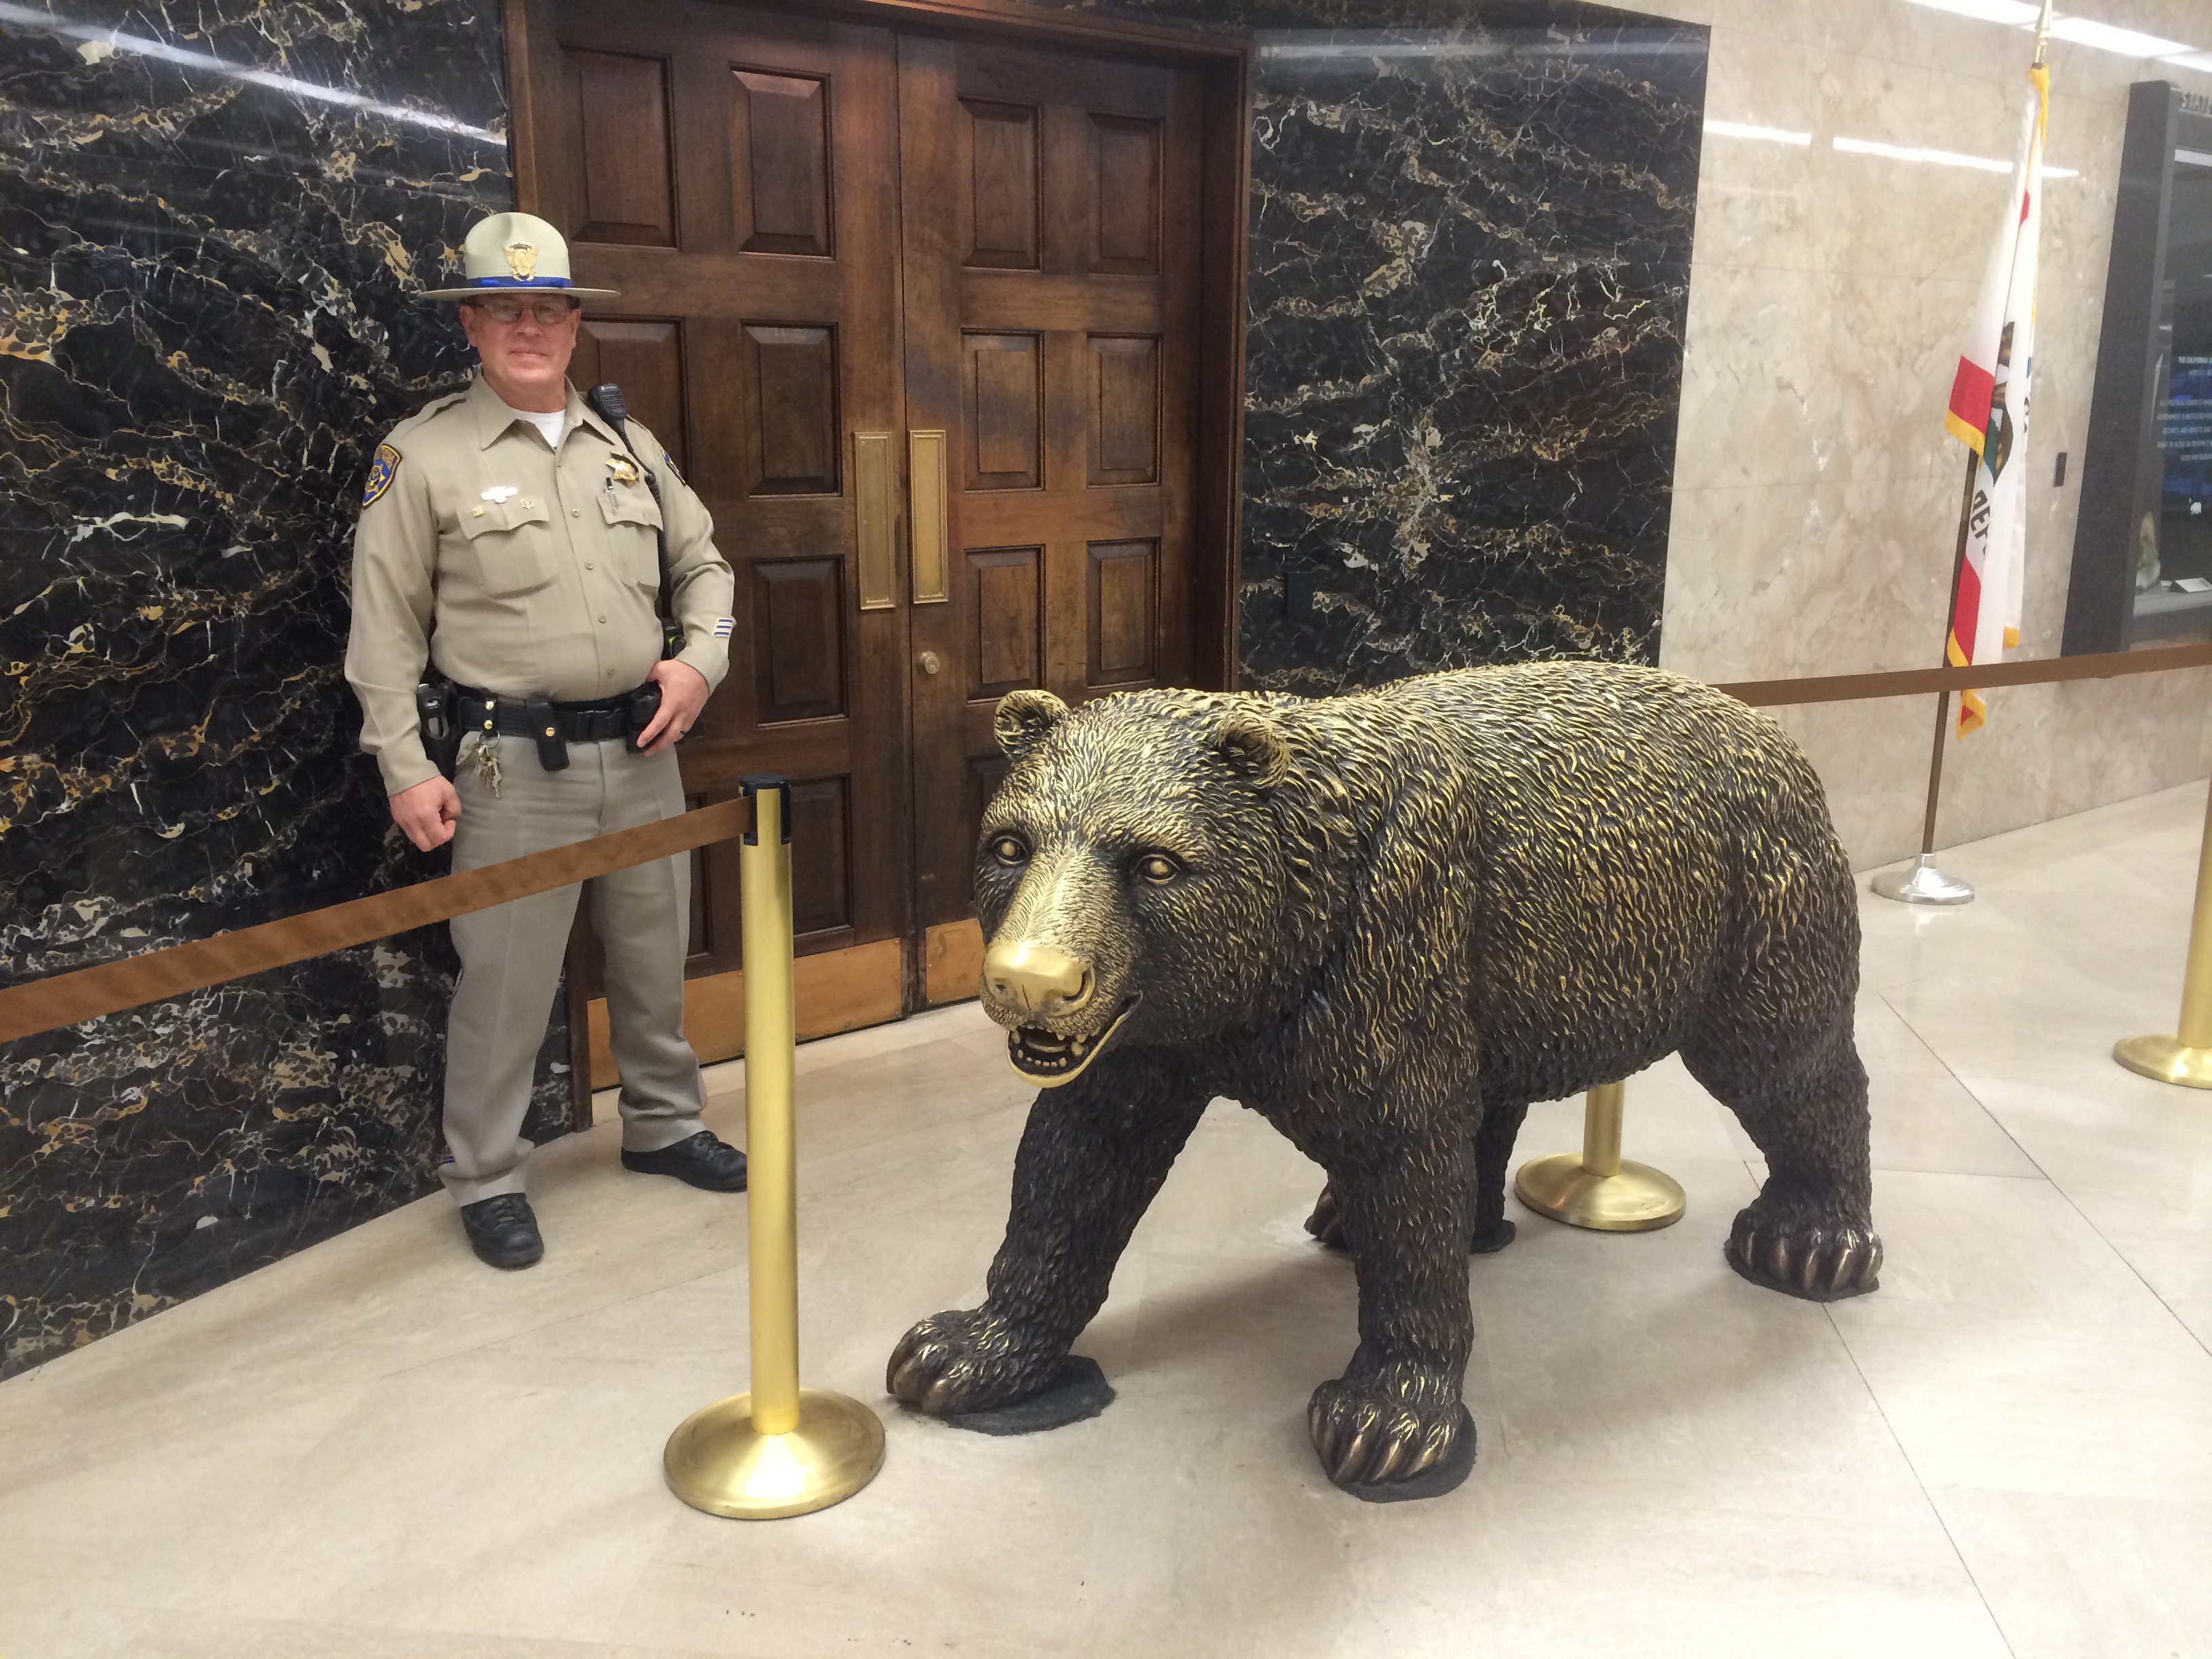 The bear statue outside the governor's office is awesome!!!